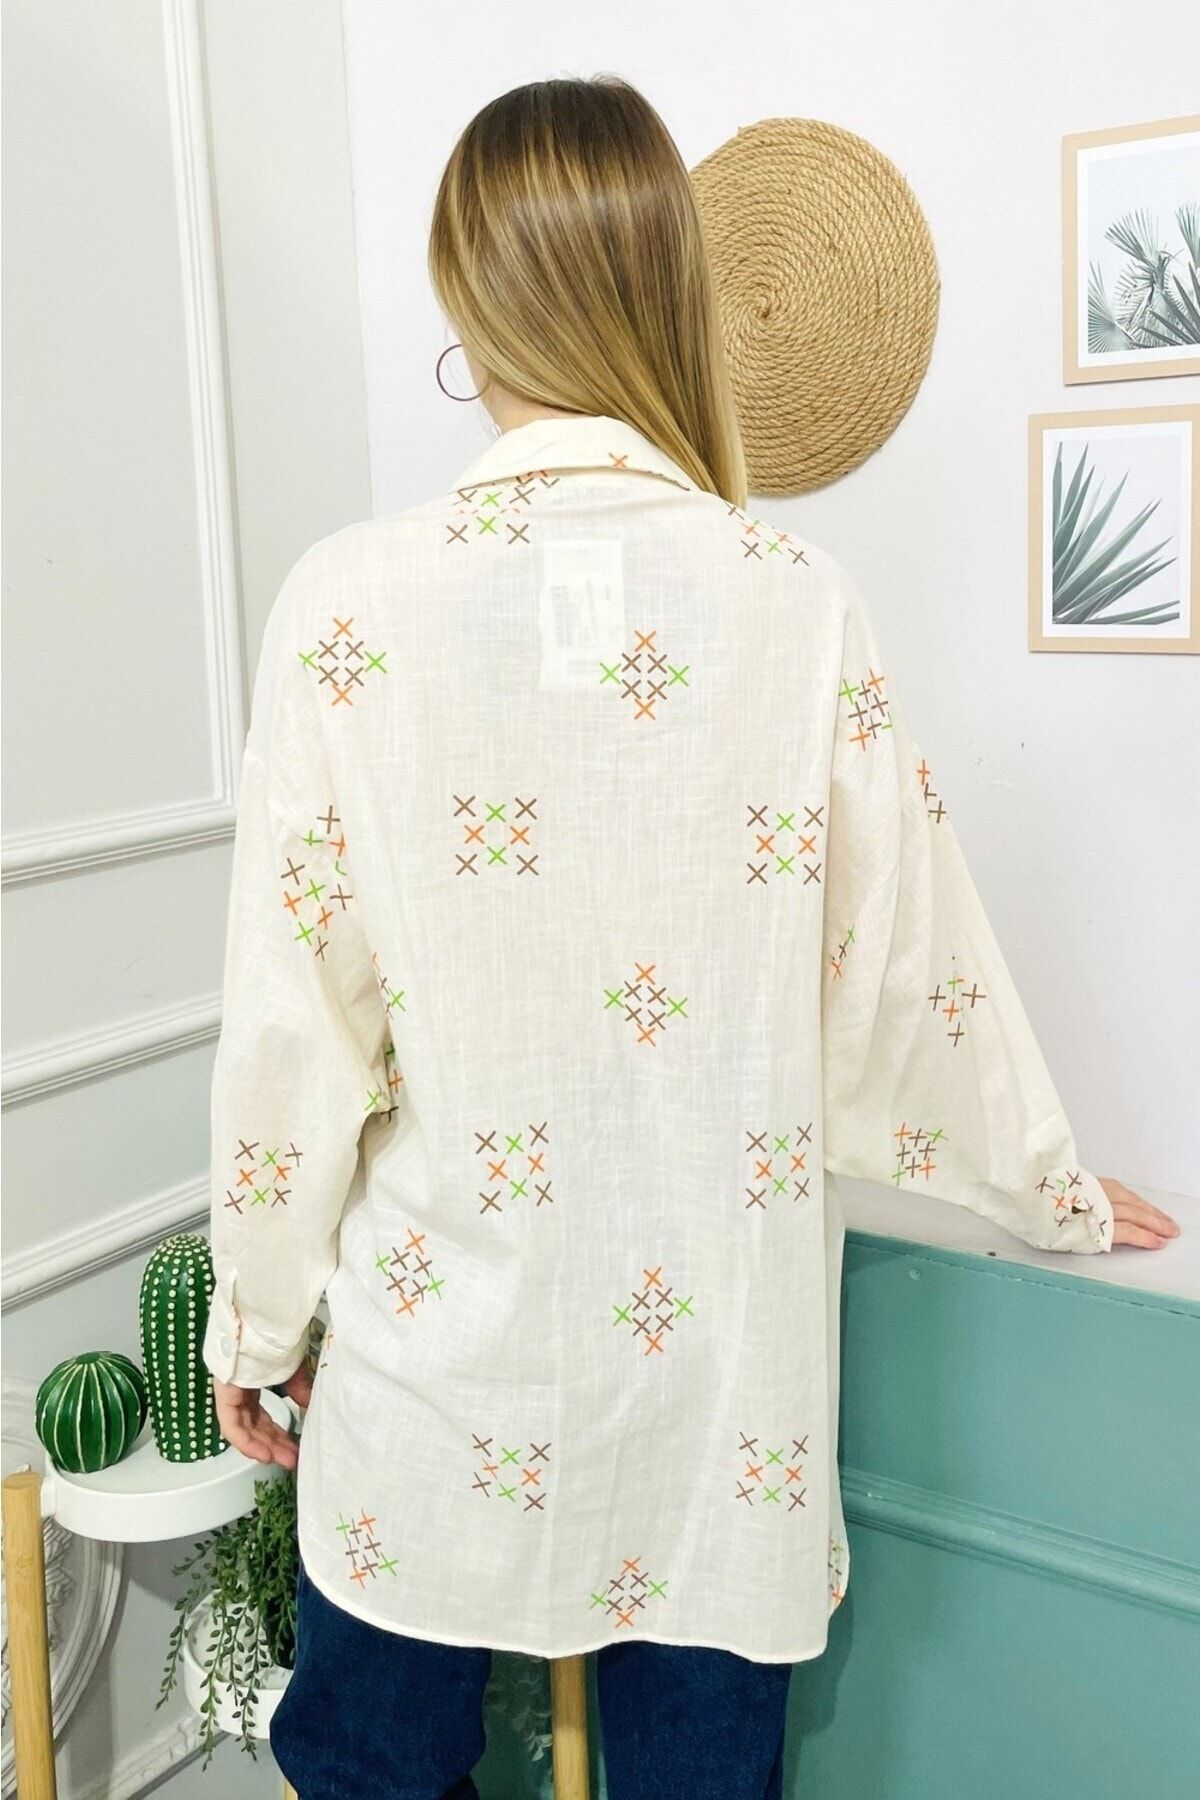 Embroidered pocket tunic